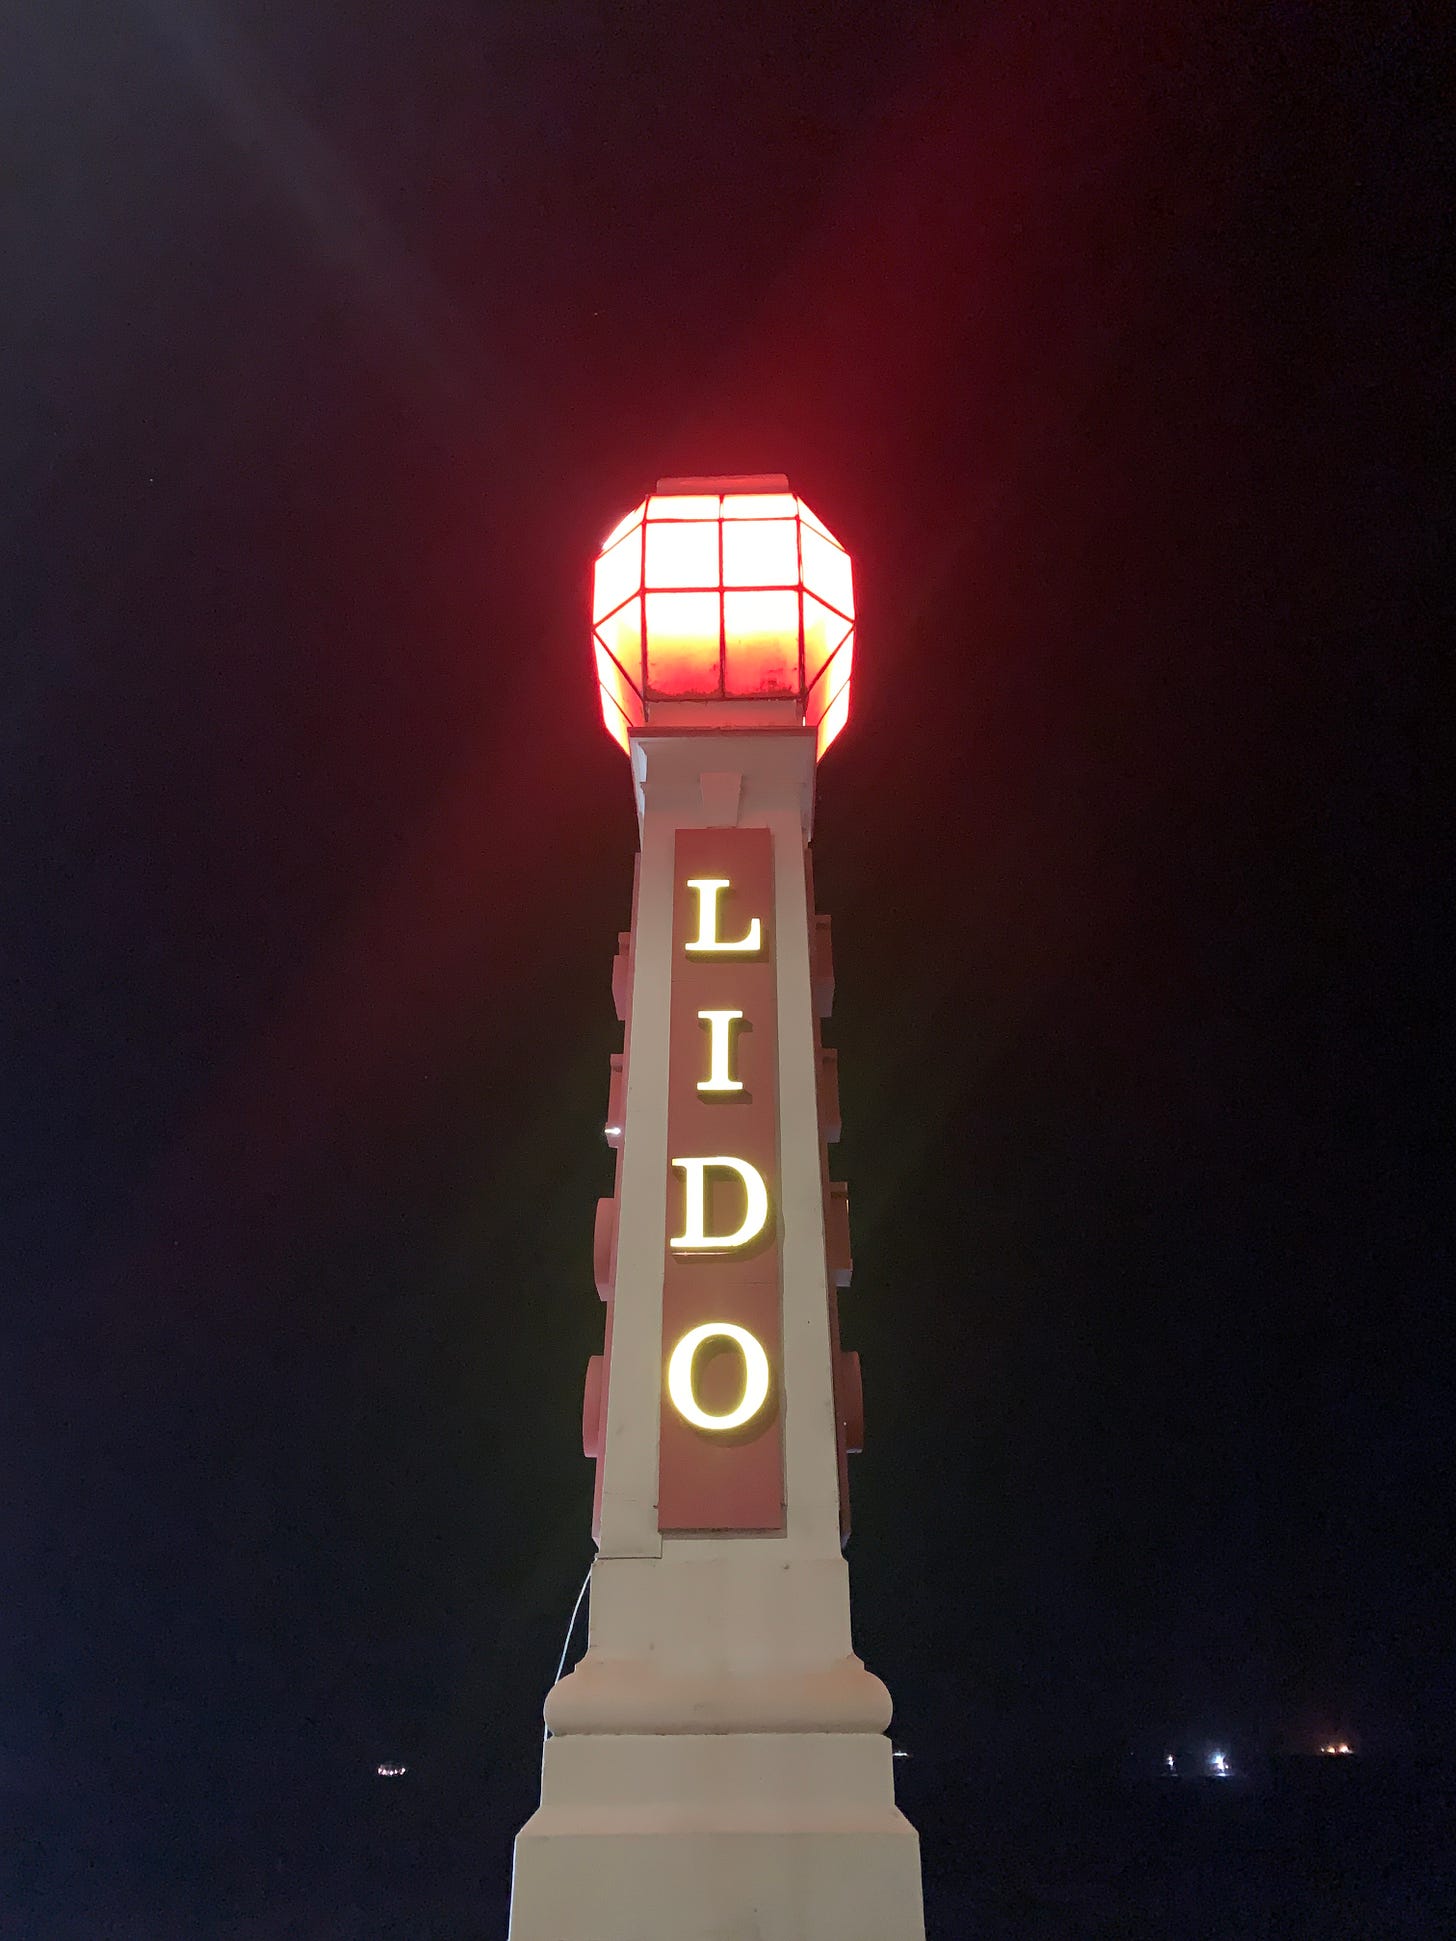 A tall vertical sign reading "Lido" with a red light at the top, and the black night sky as the backdrop